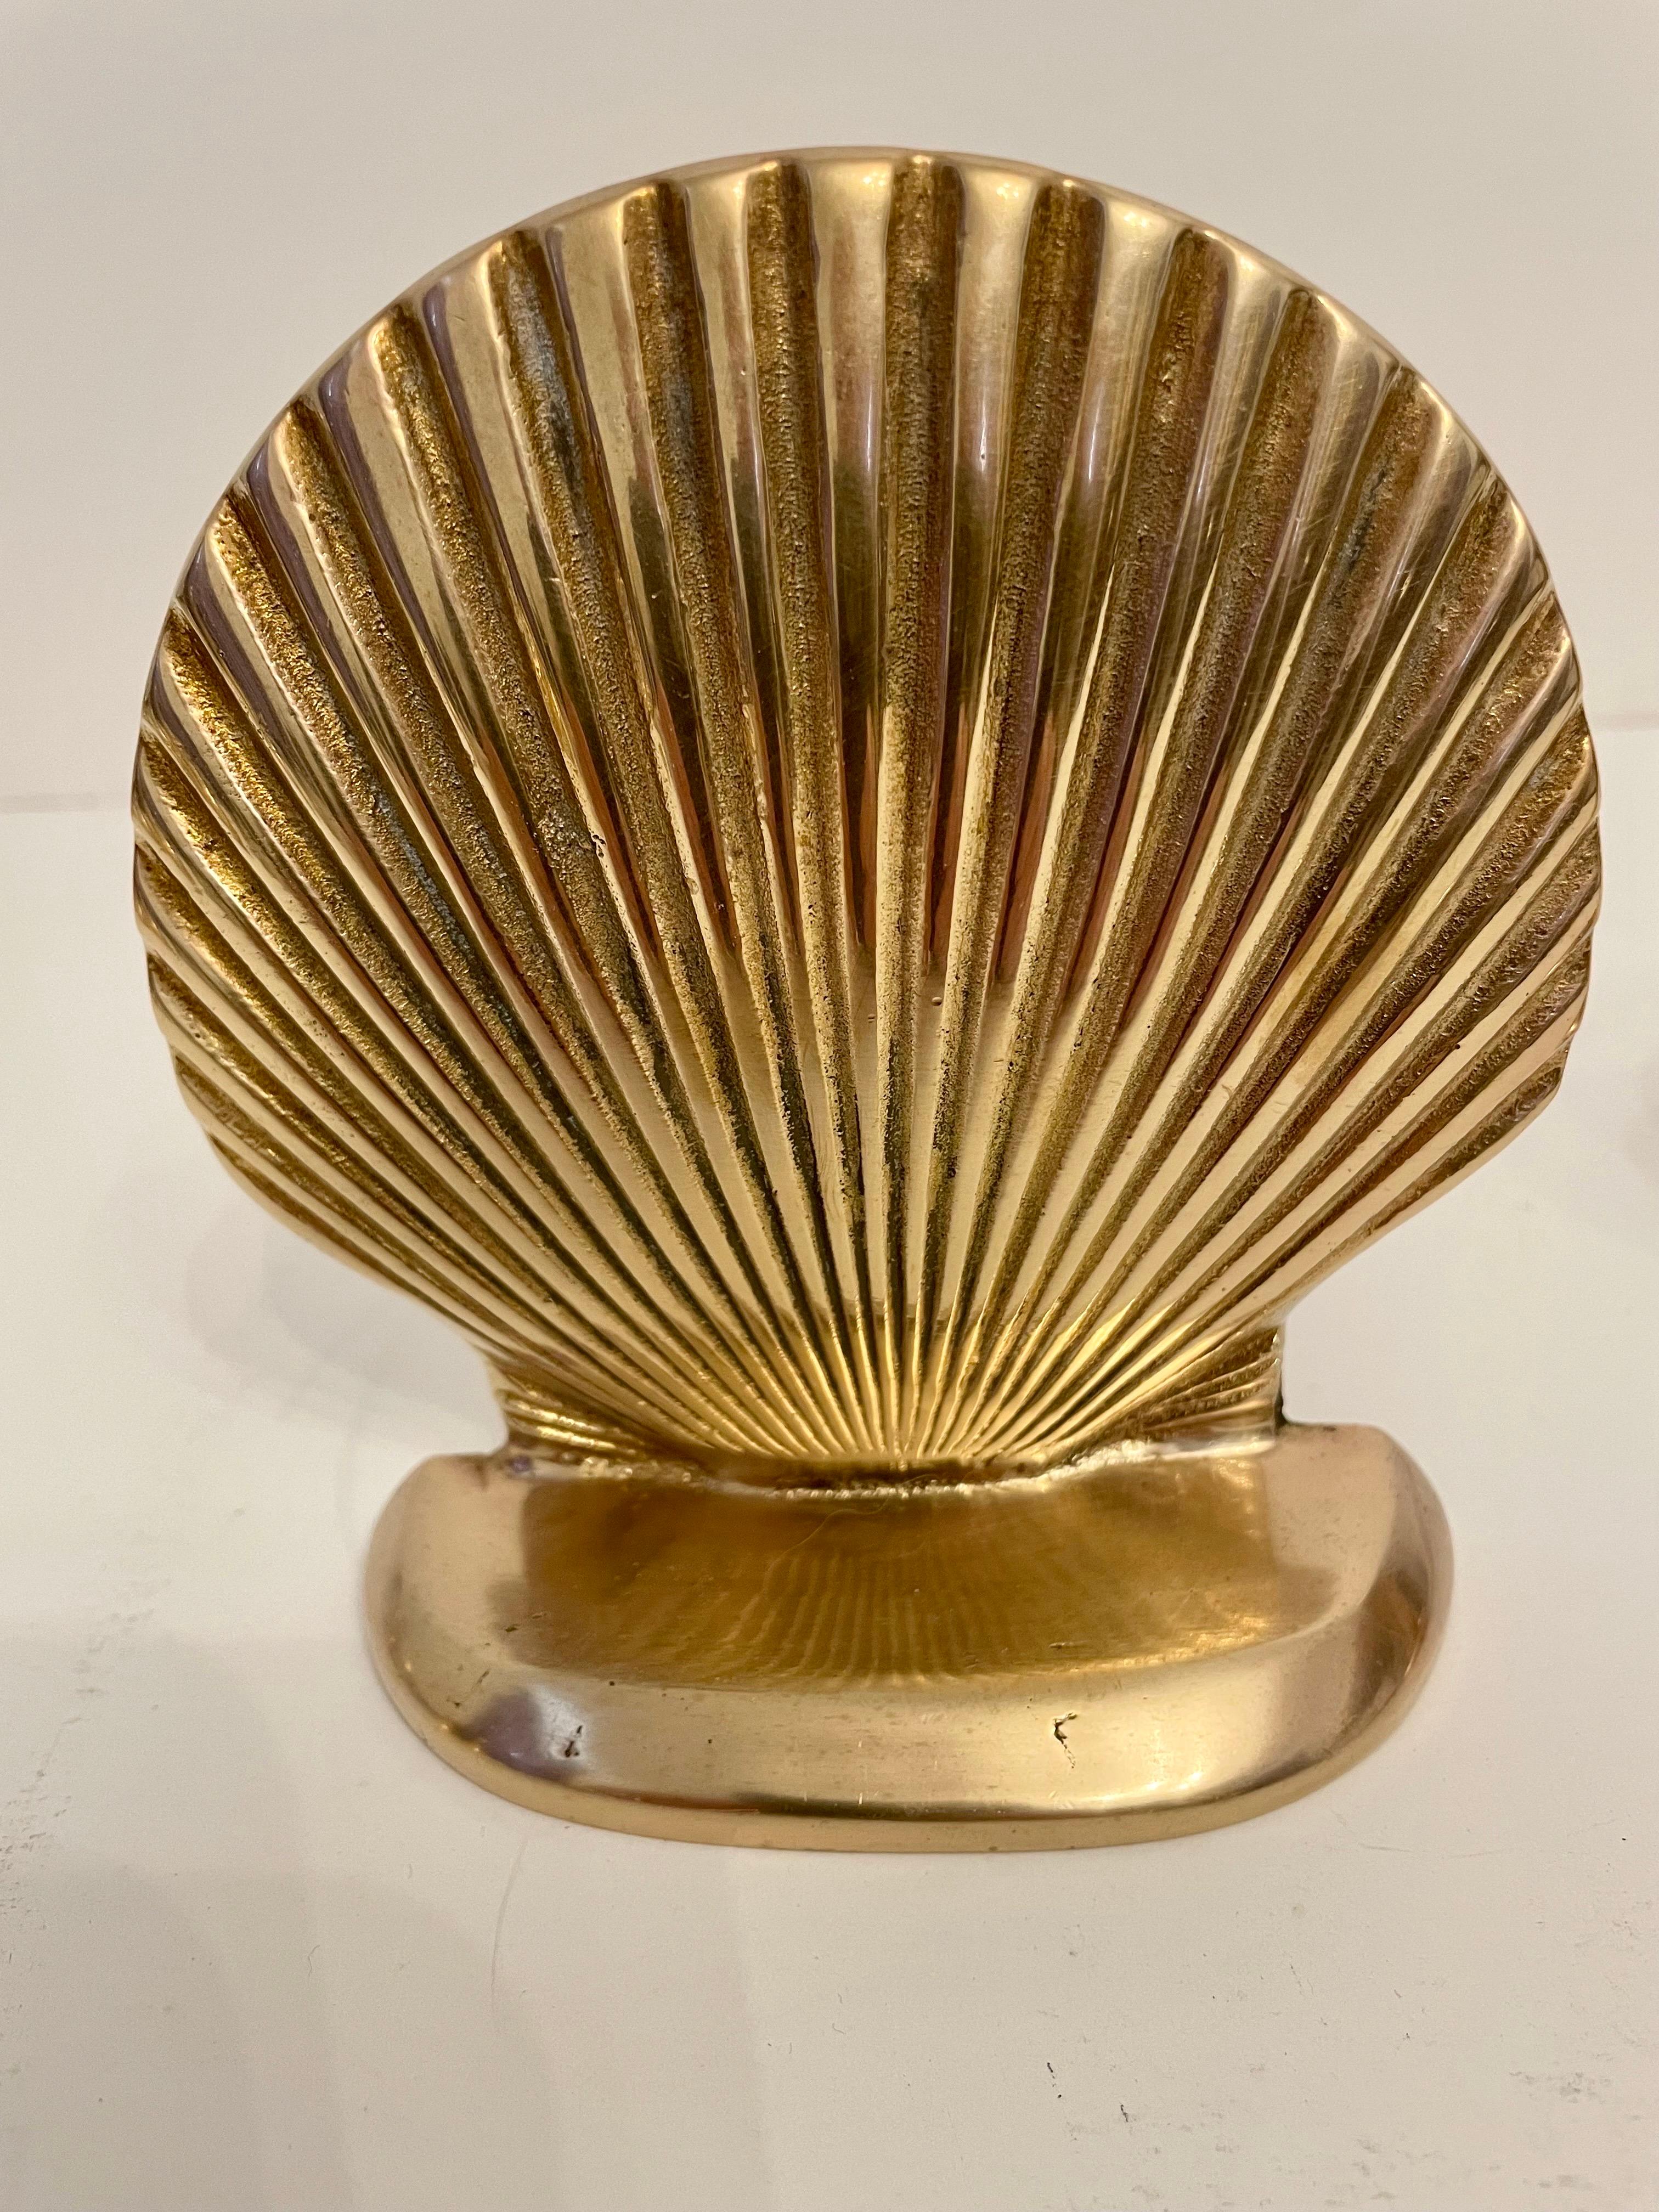 Korean Vintage Brass Clam Shell Seashell Bookends For Sale